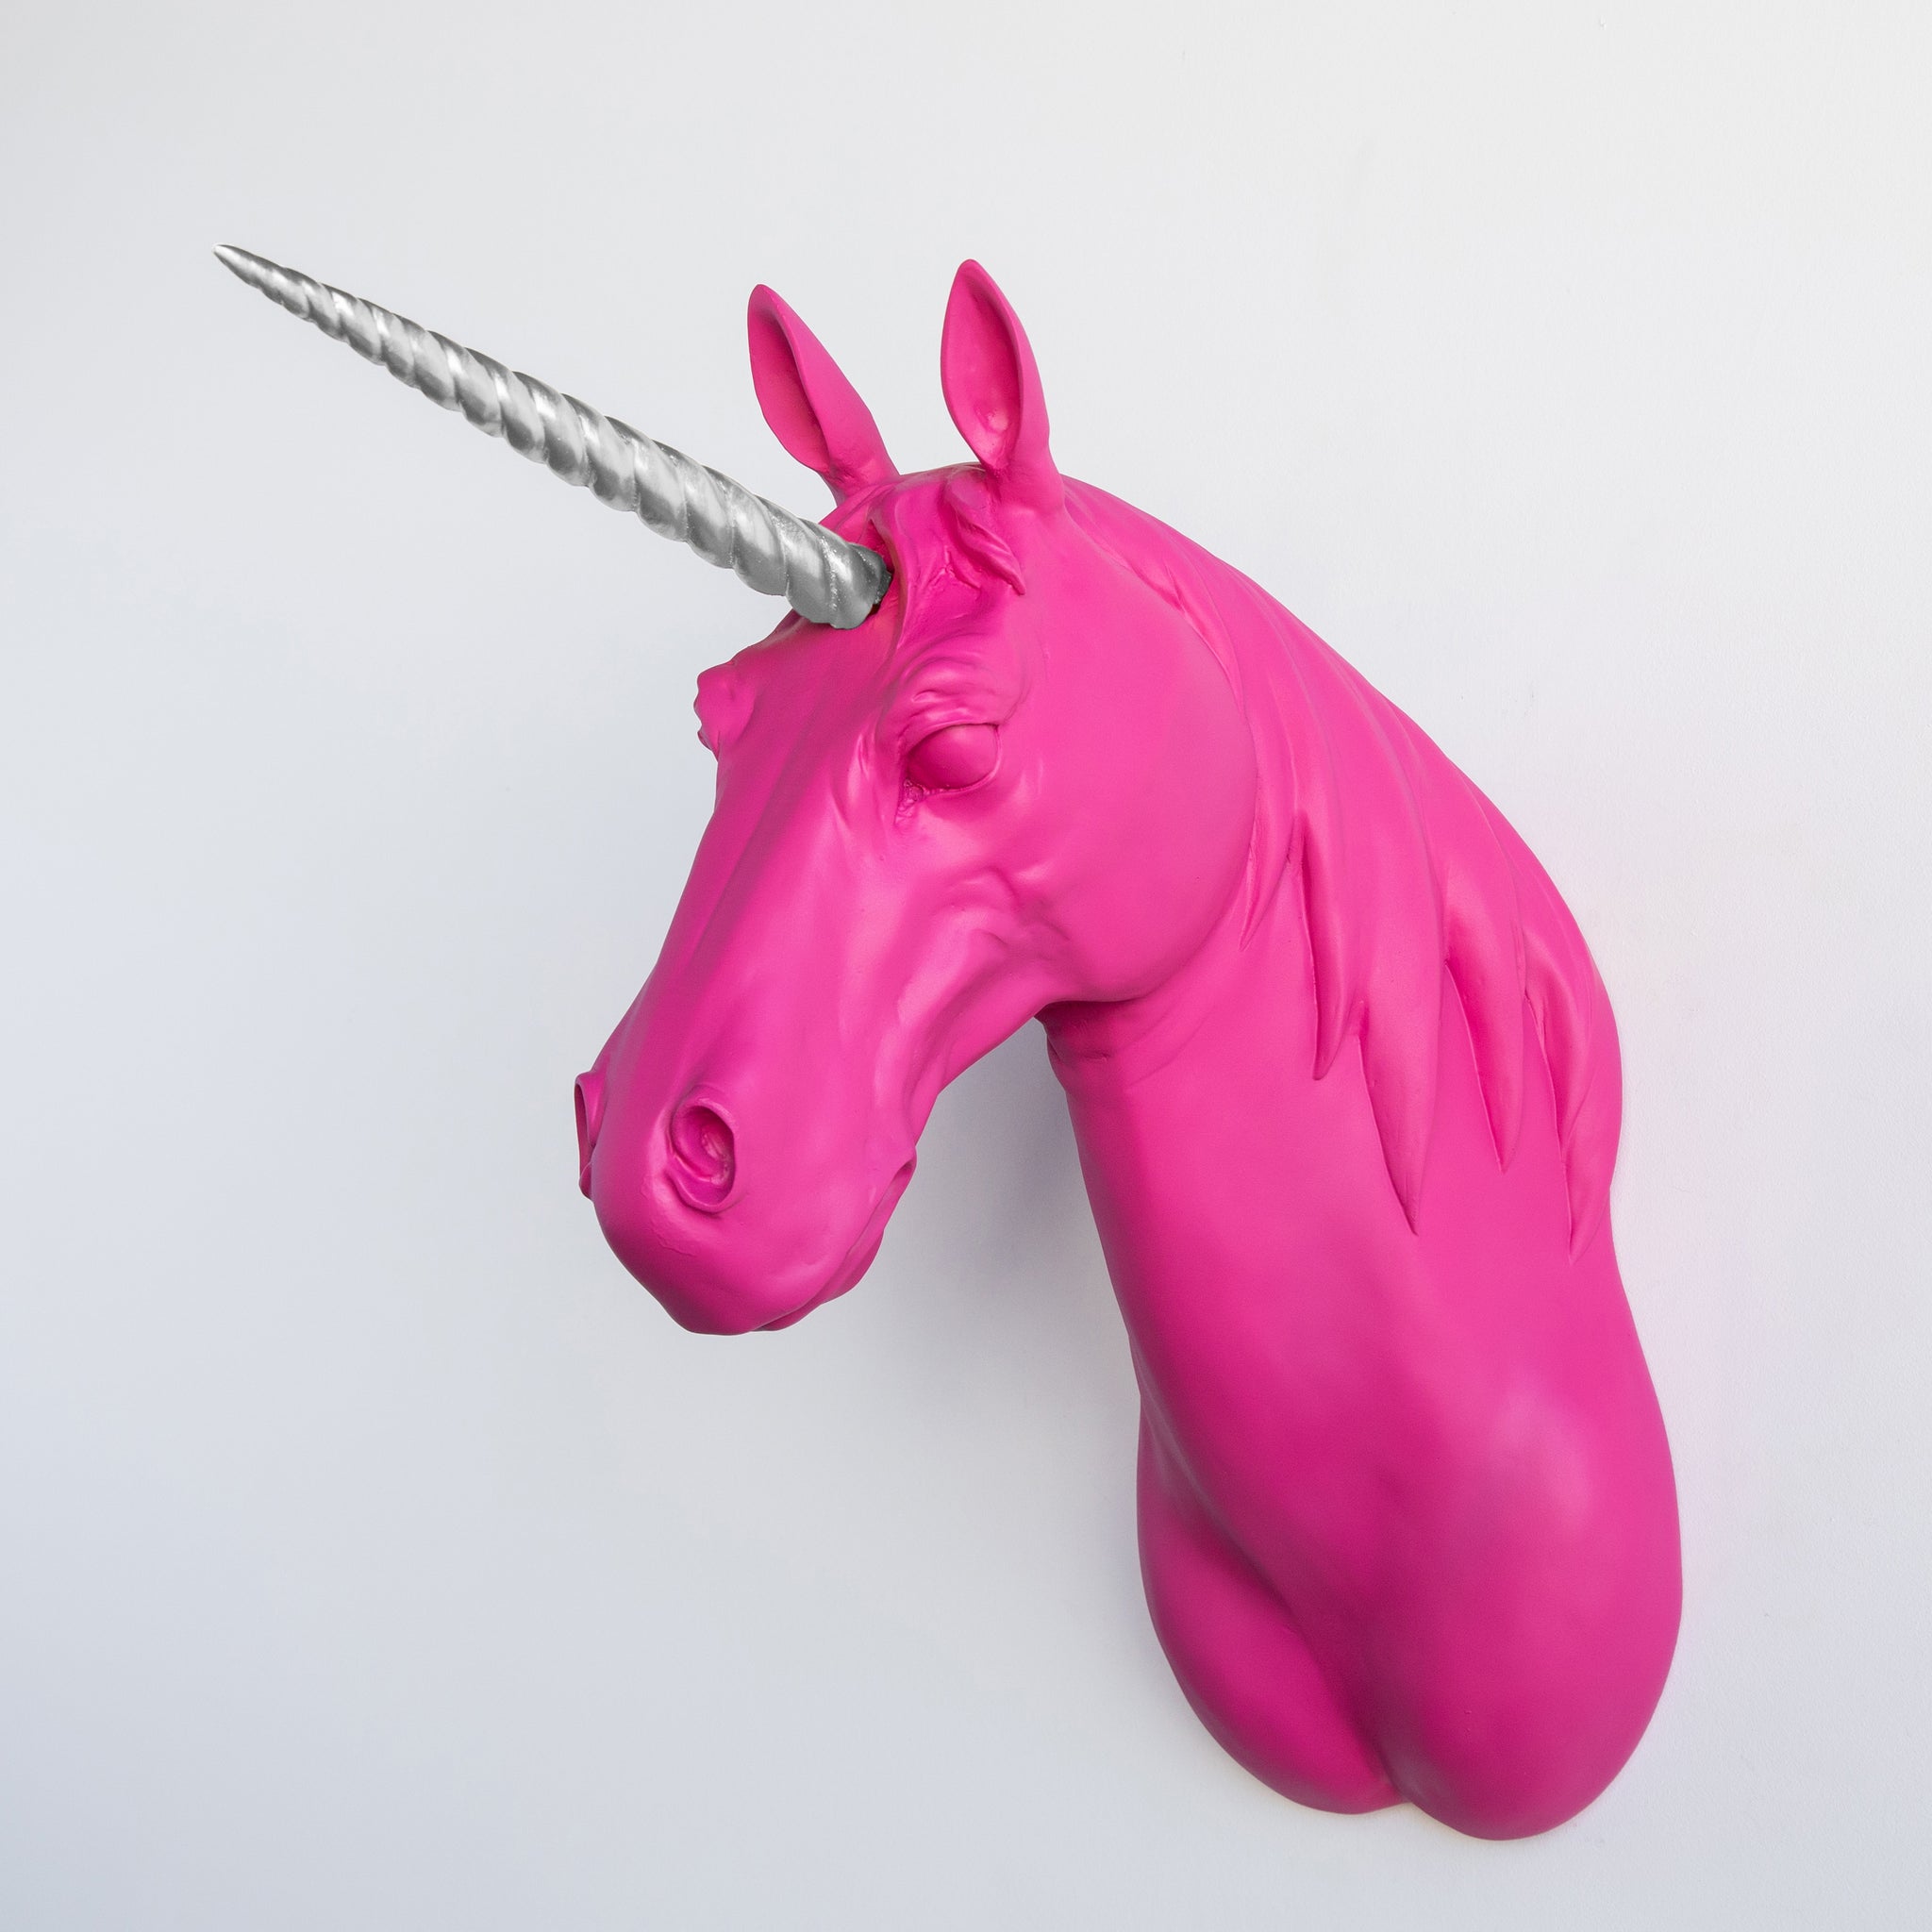 XL Unicorn Head Wall Mount // Hot Pink and Silver